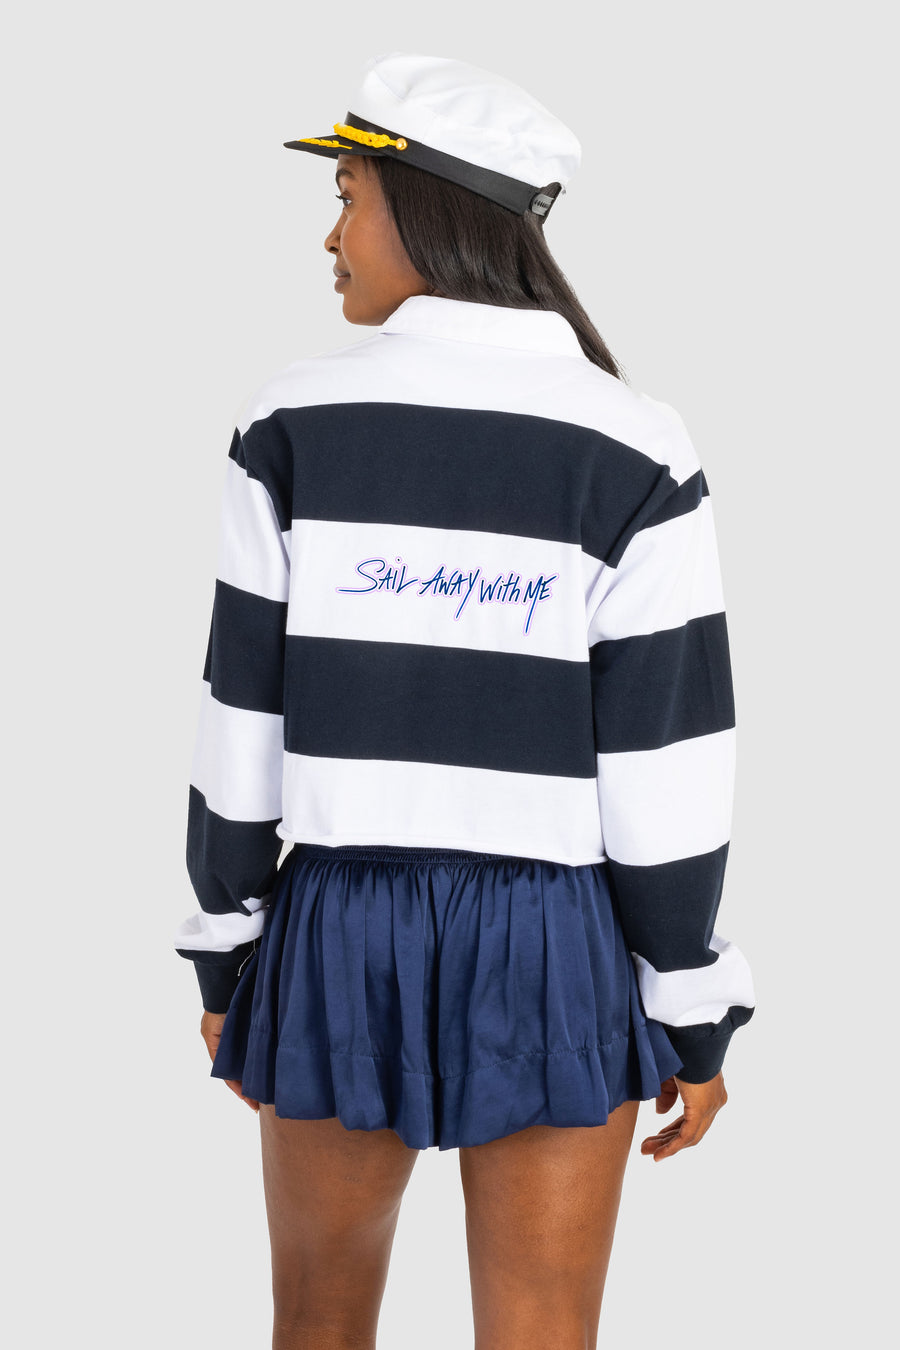 Rugby Crop Stripe + Sail with Me *Limited*Edition*